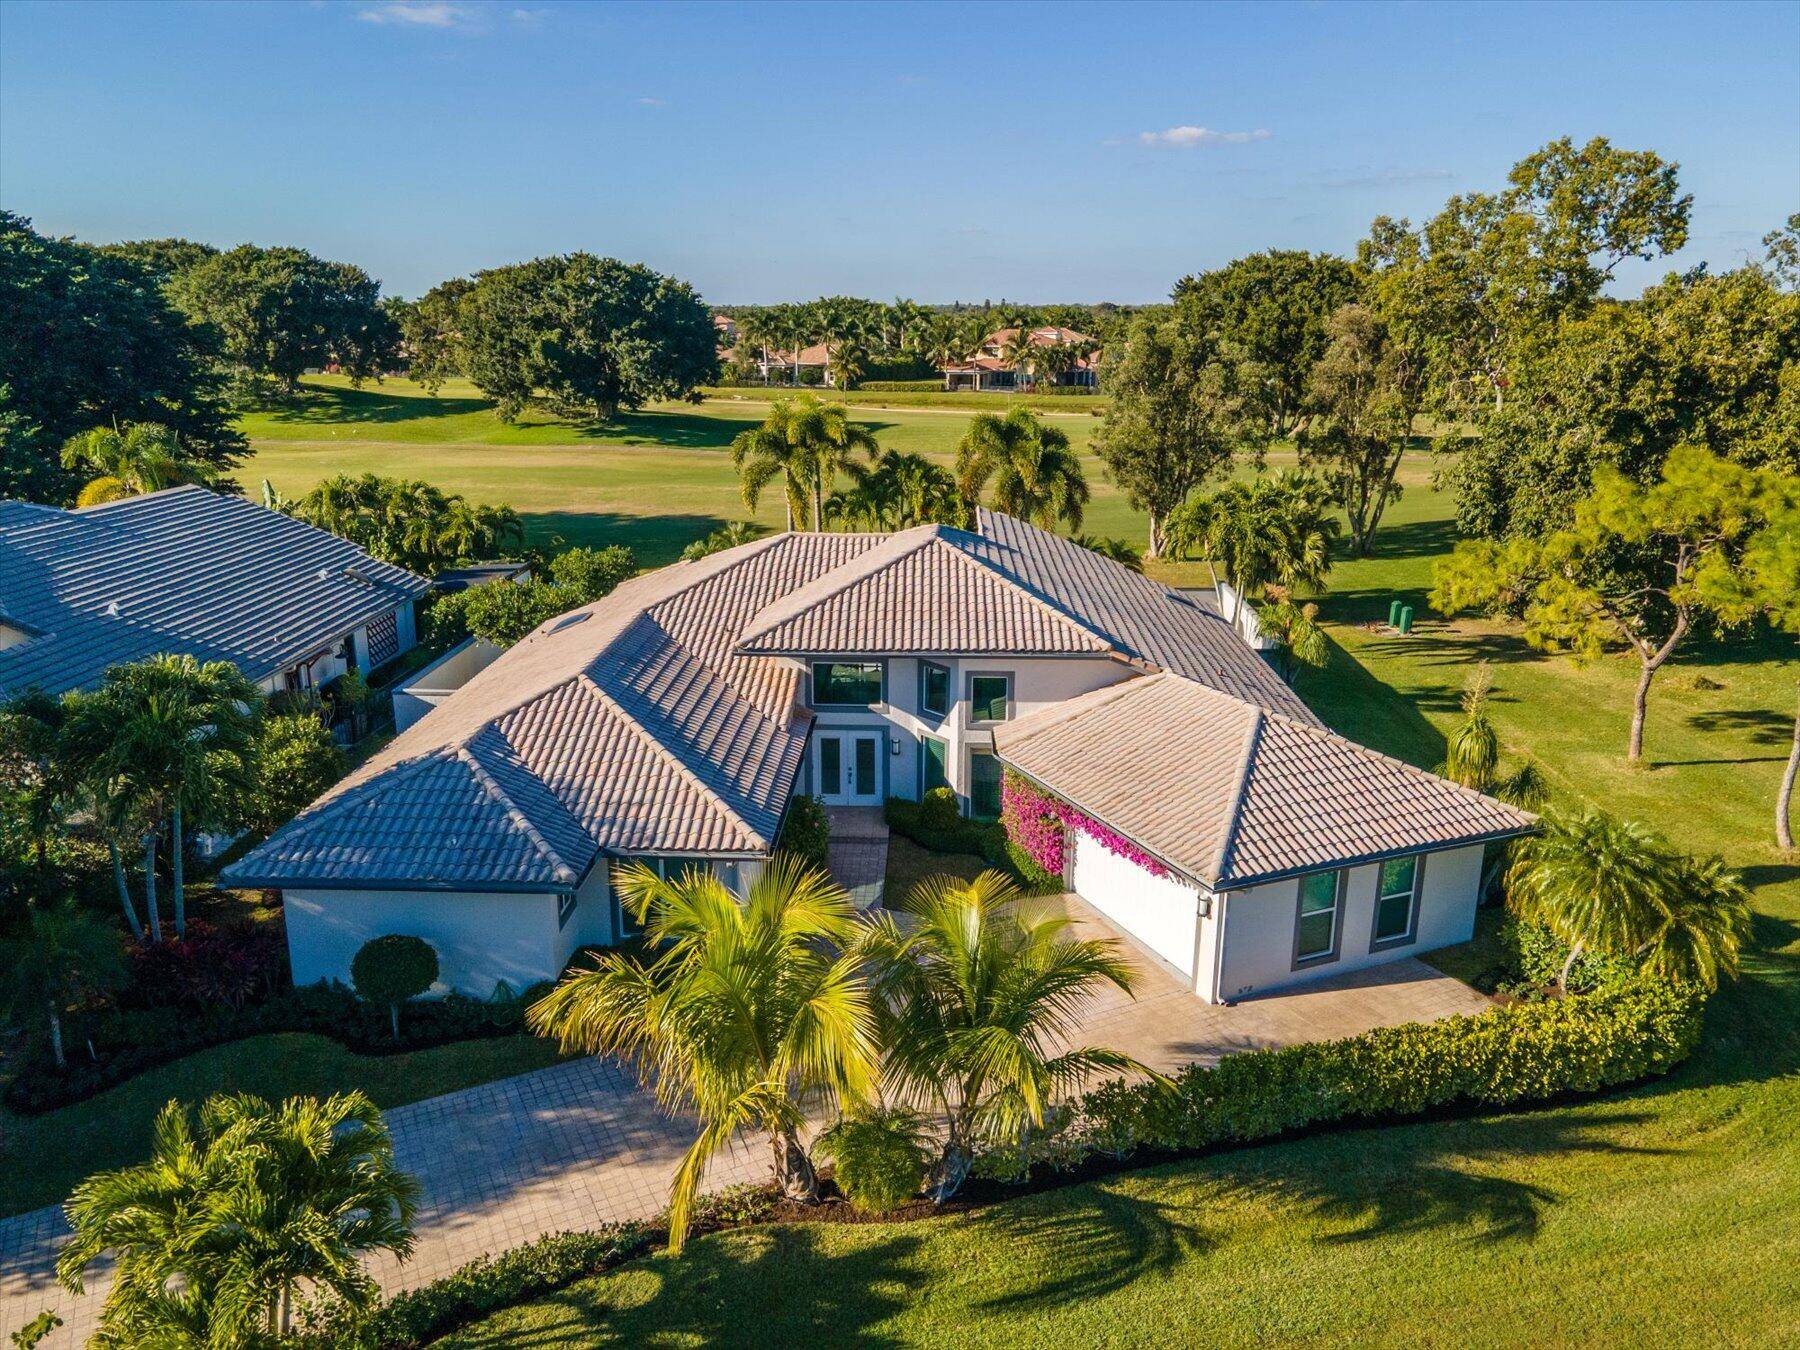 A luxurious contemporary design awaits you in this stunning 4 bedroom, 4 bath home located within the prestigious Palm Beach Polo Golf and Country Club.